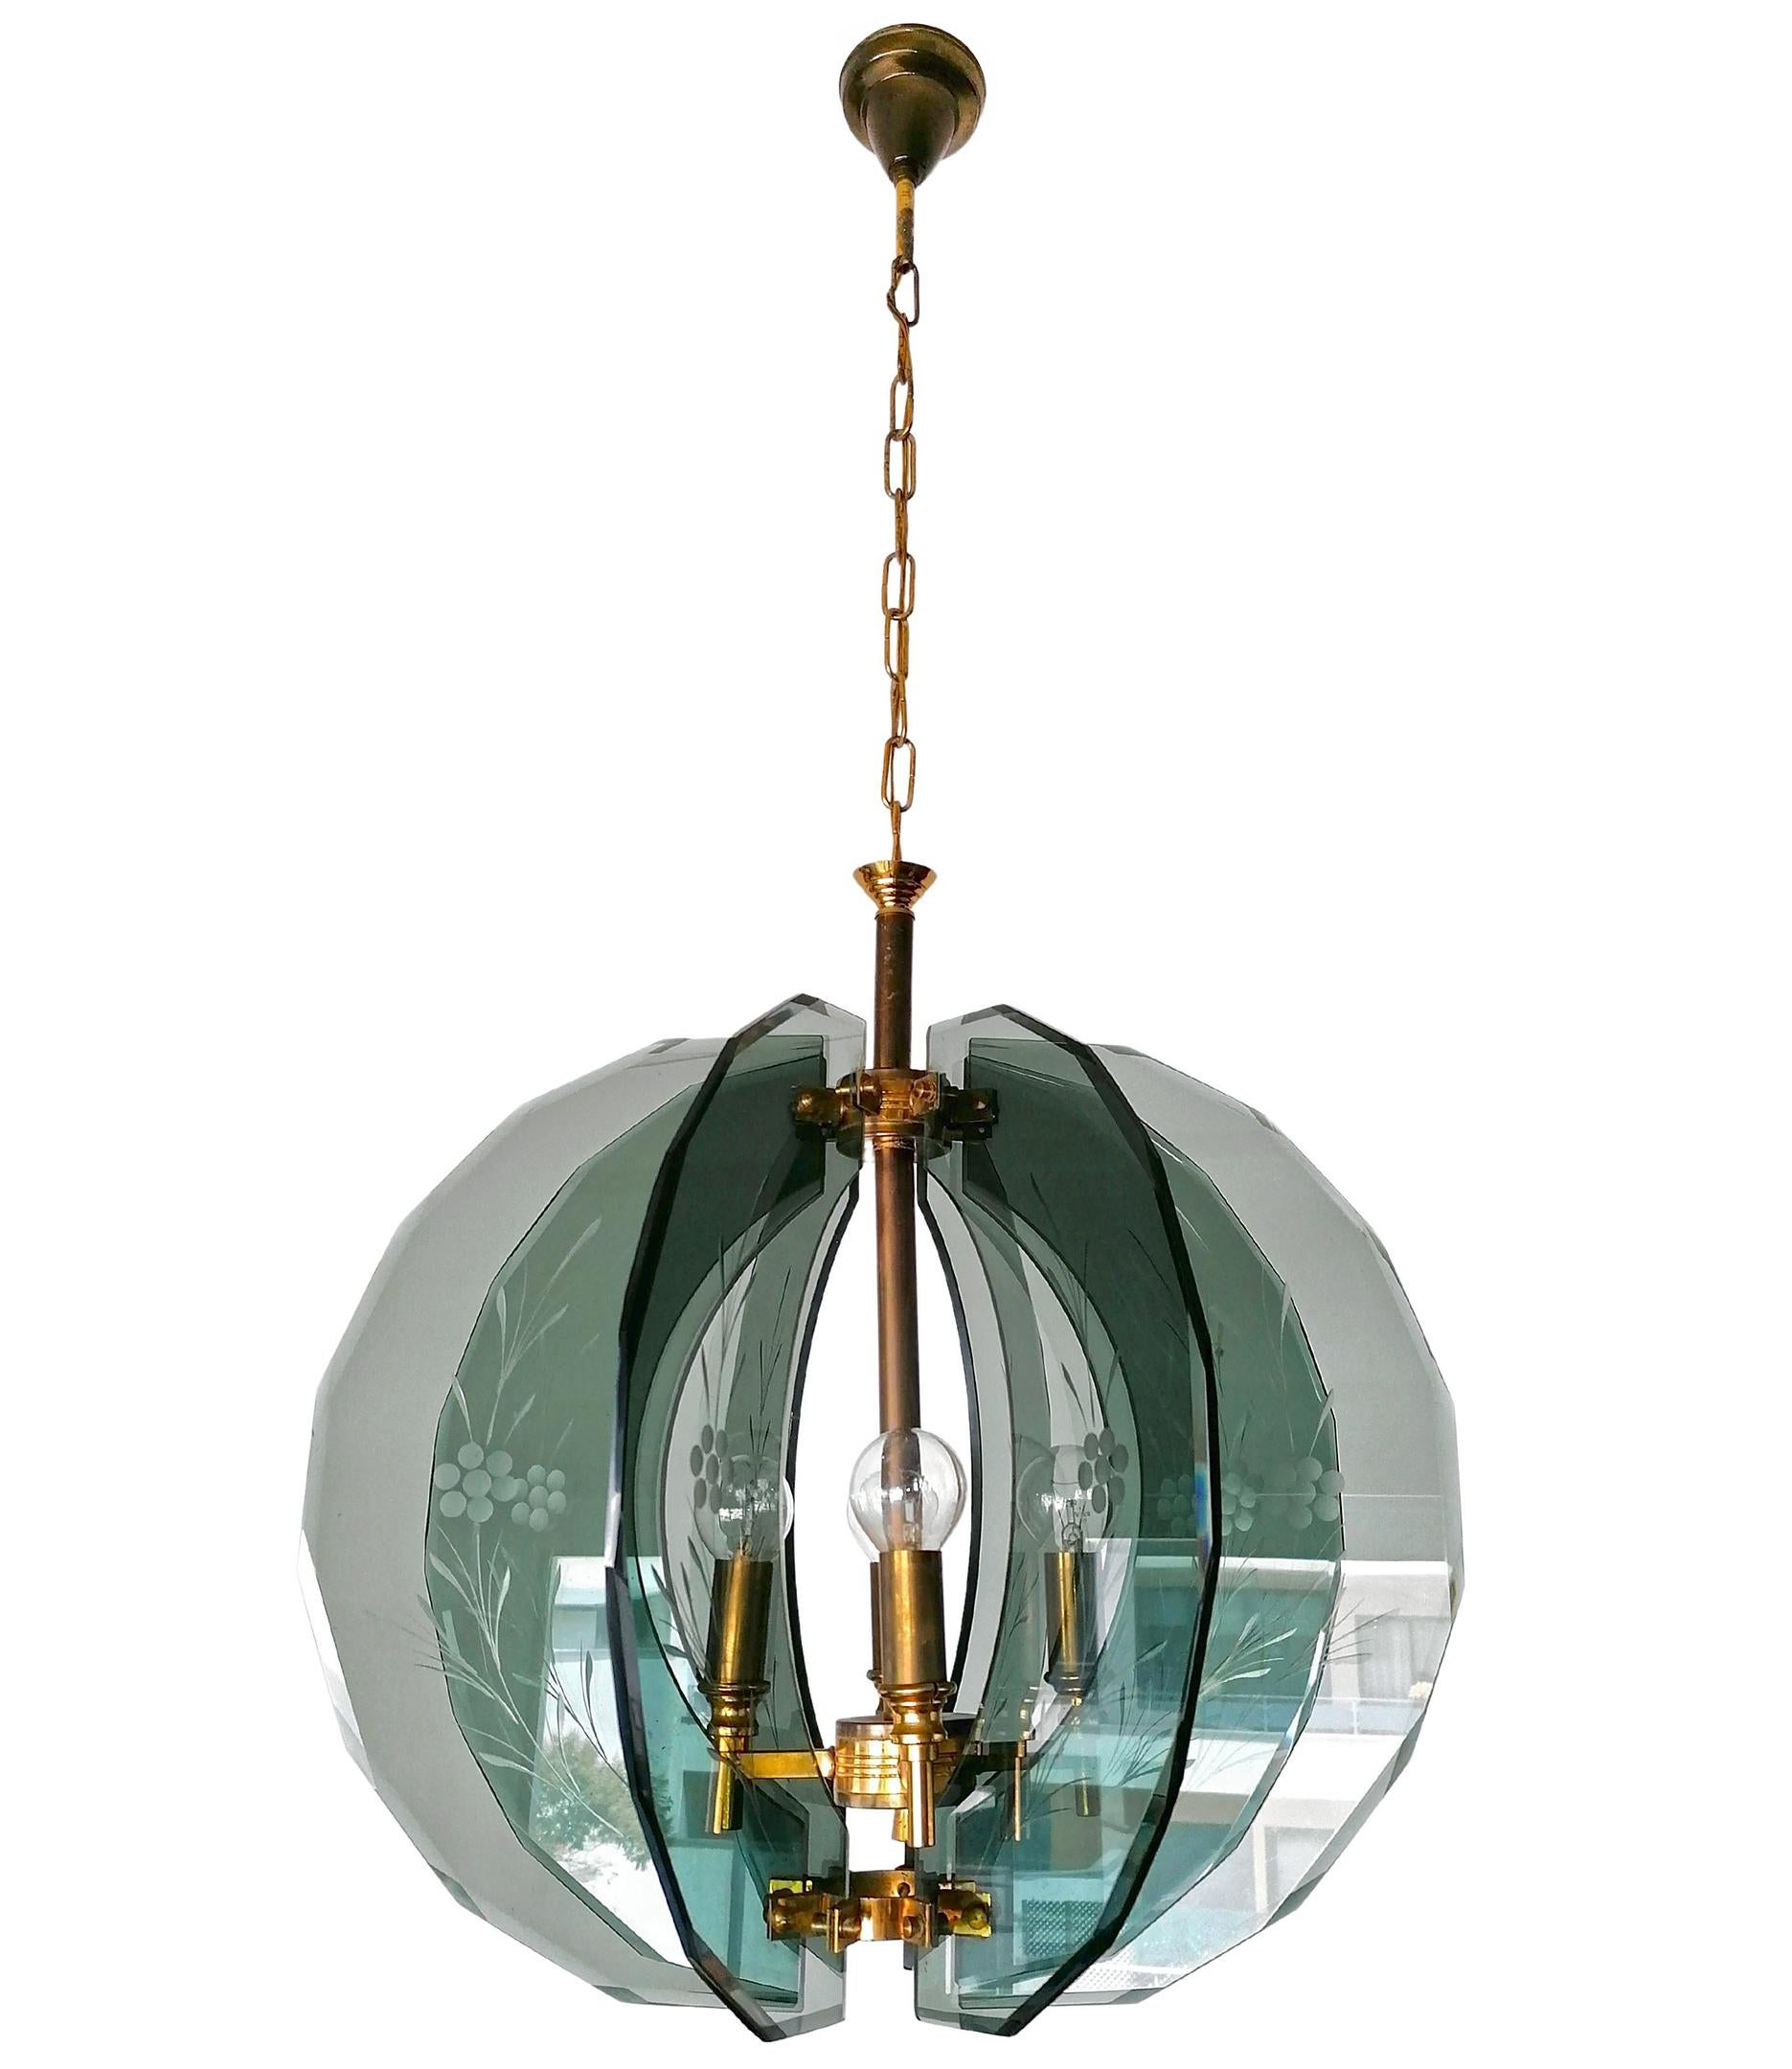 Italian Vintage Gino Paroldo Chandelier with Brass and Smoked Hand Cut Glass, 1950s For Sale